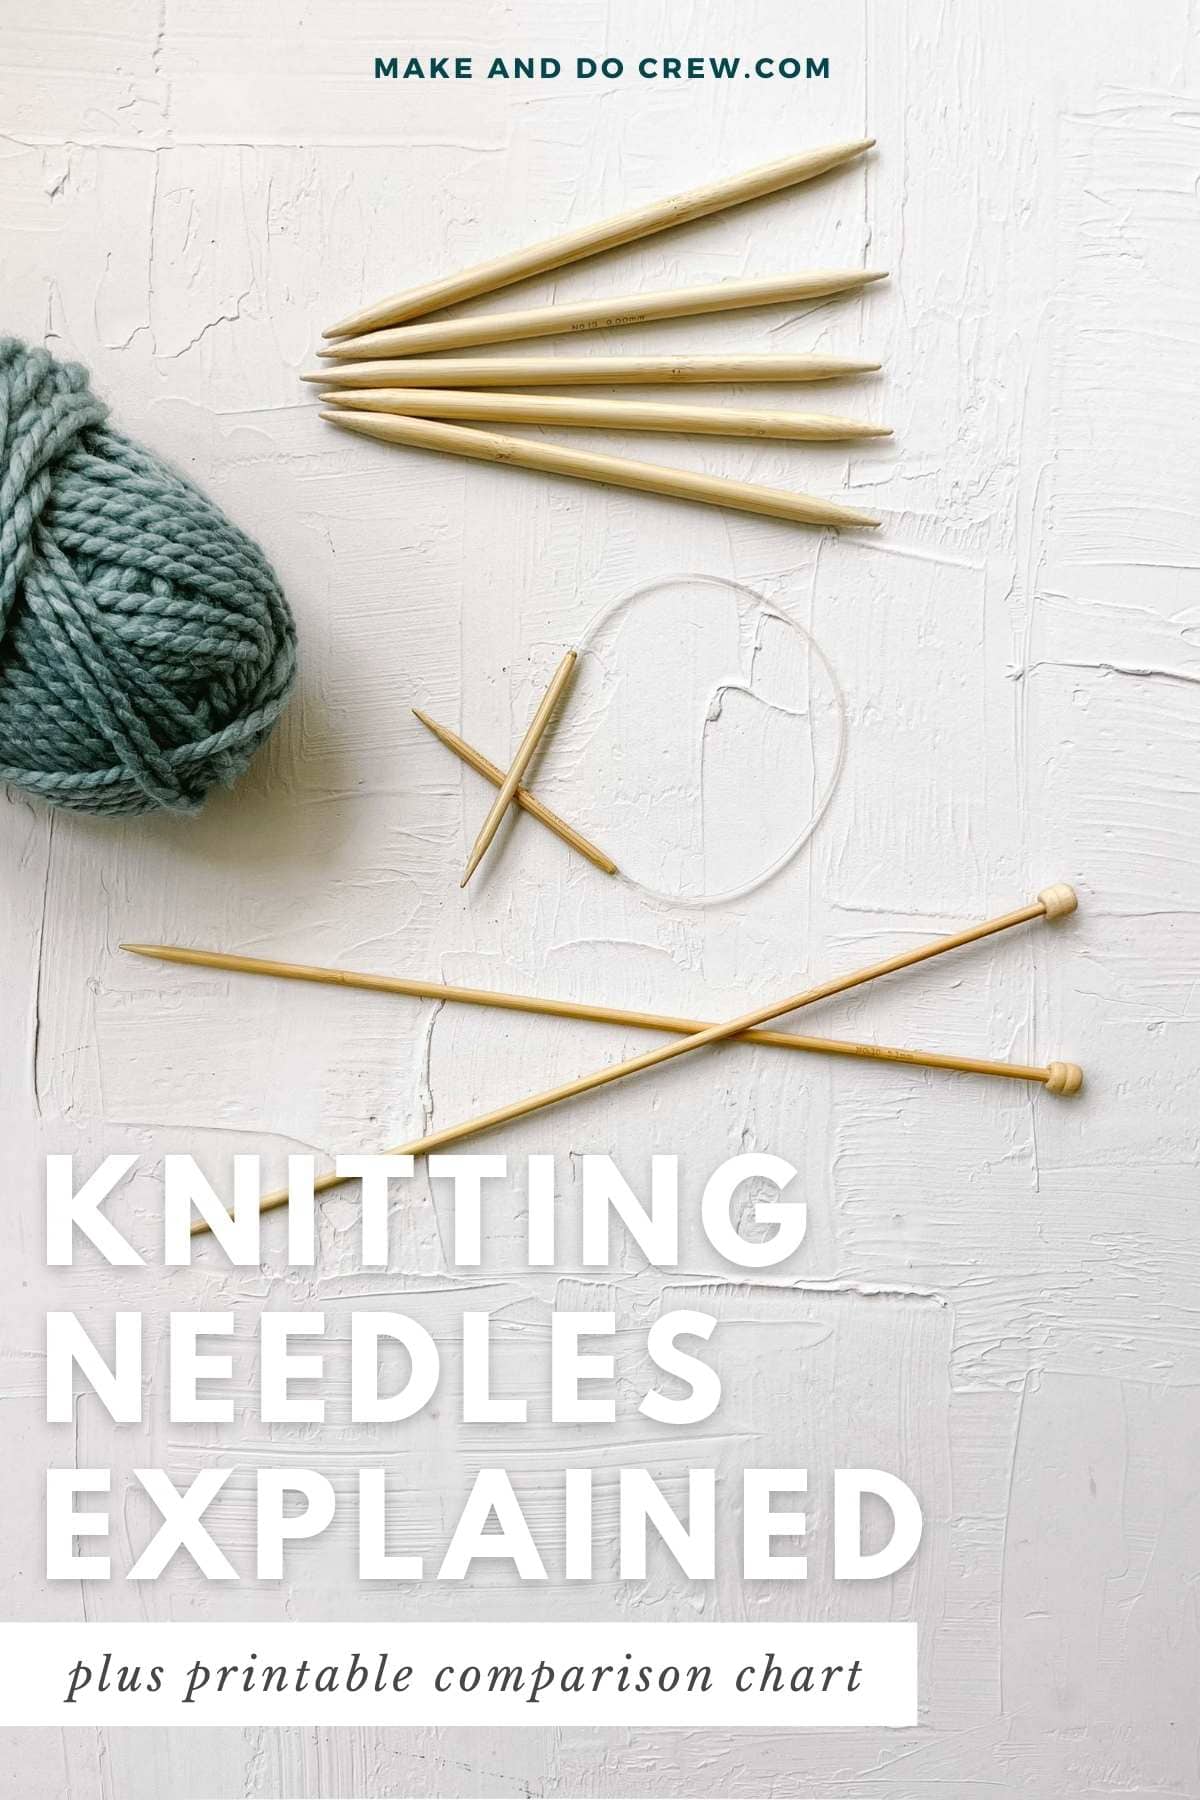 Knitting needles explained with printable comparison chart.